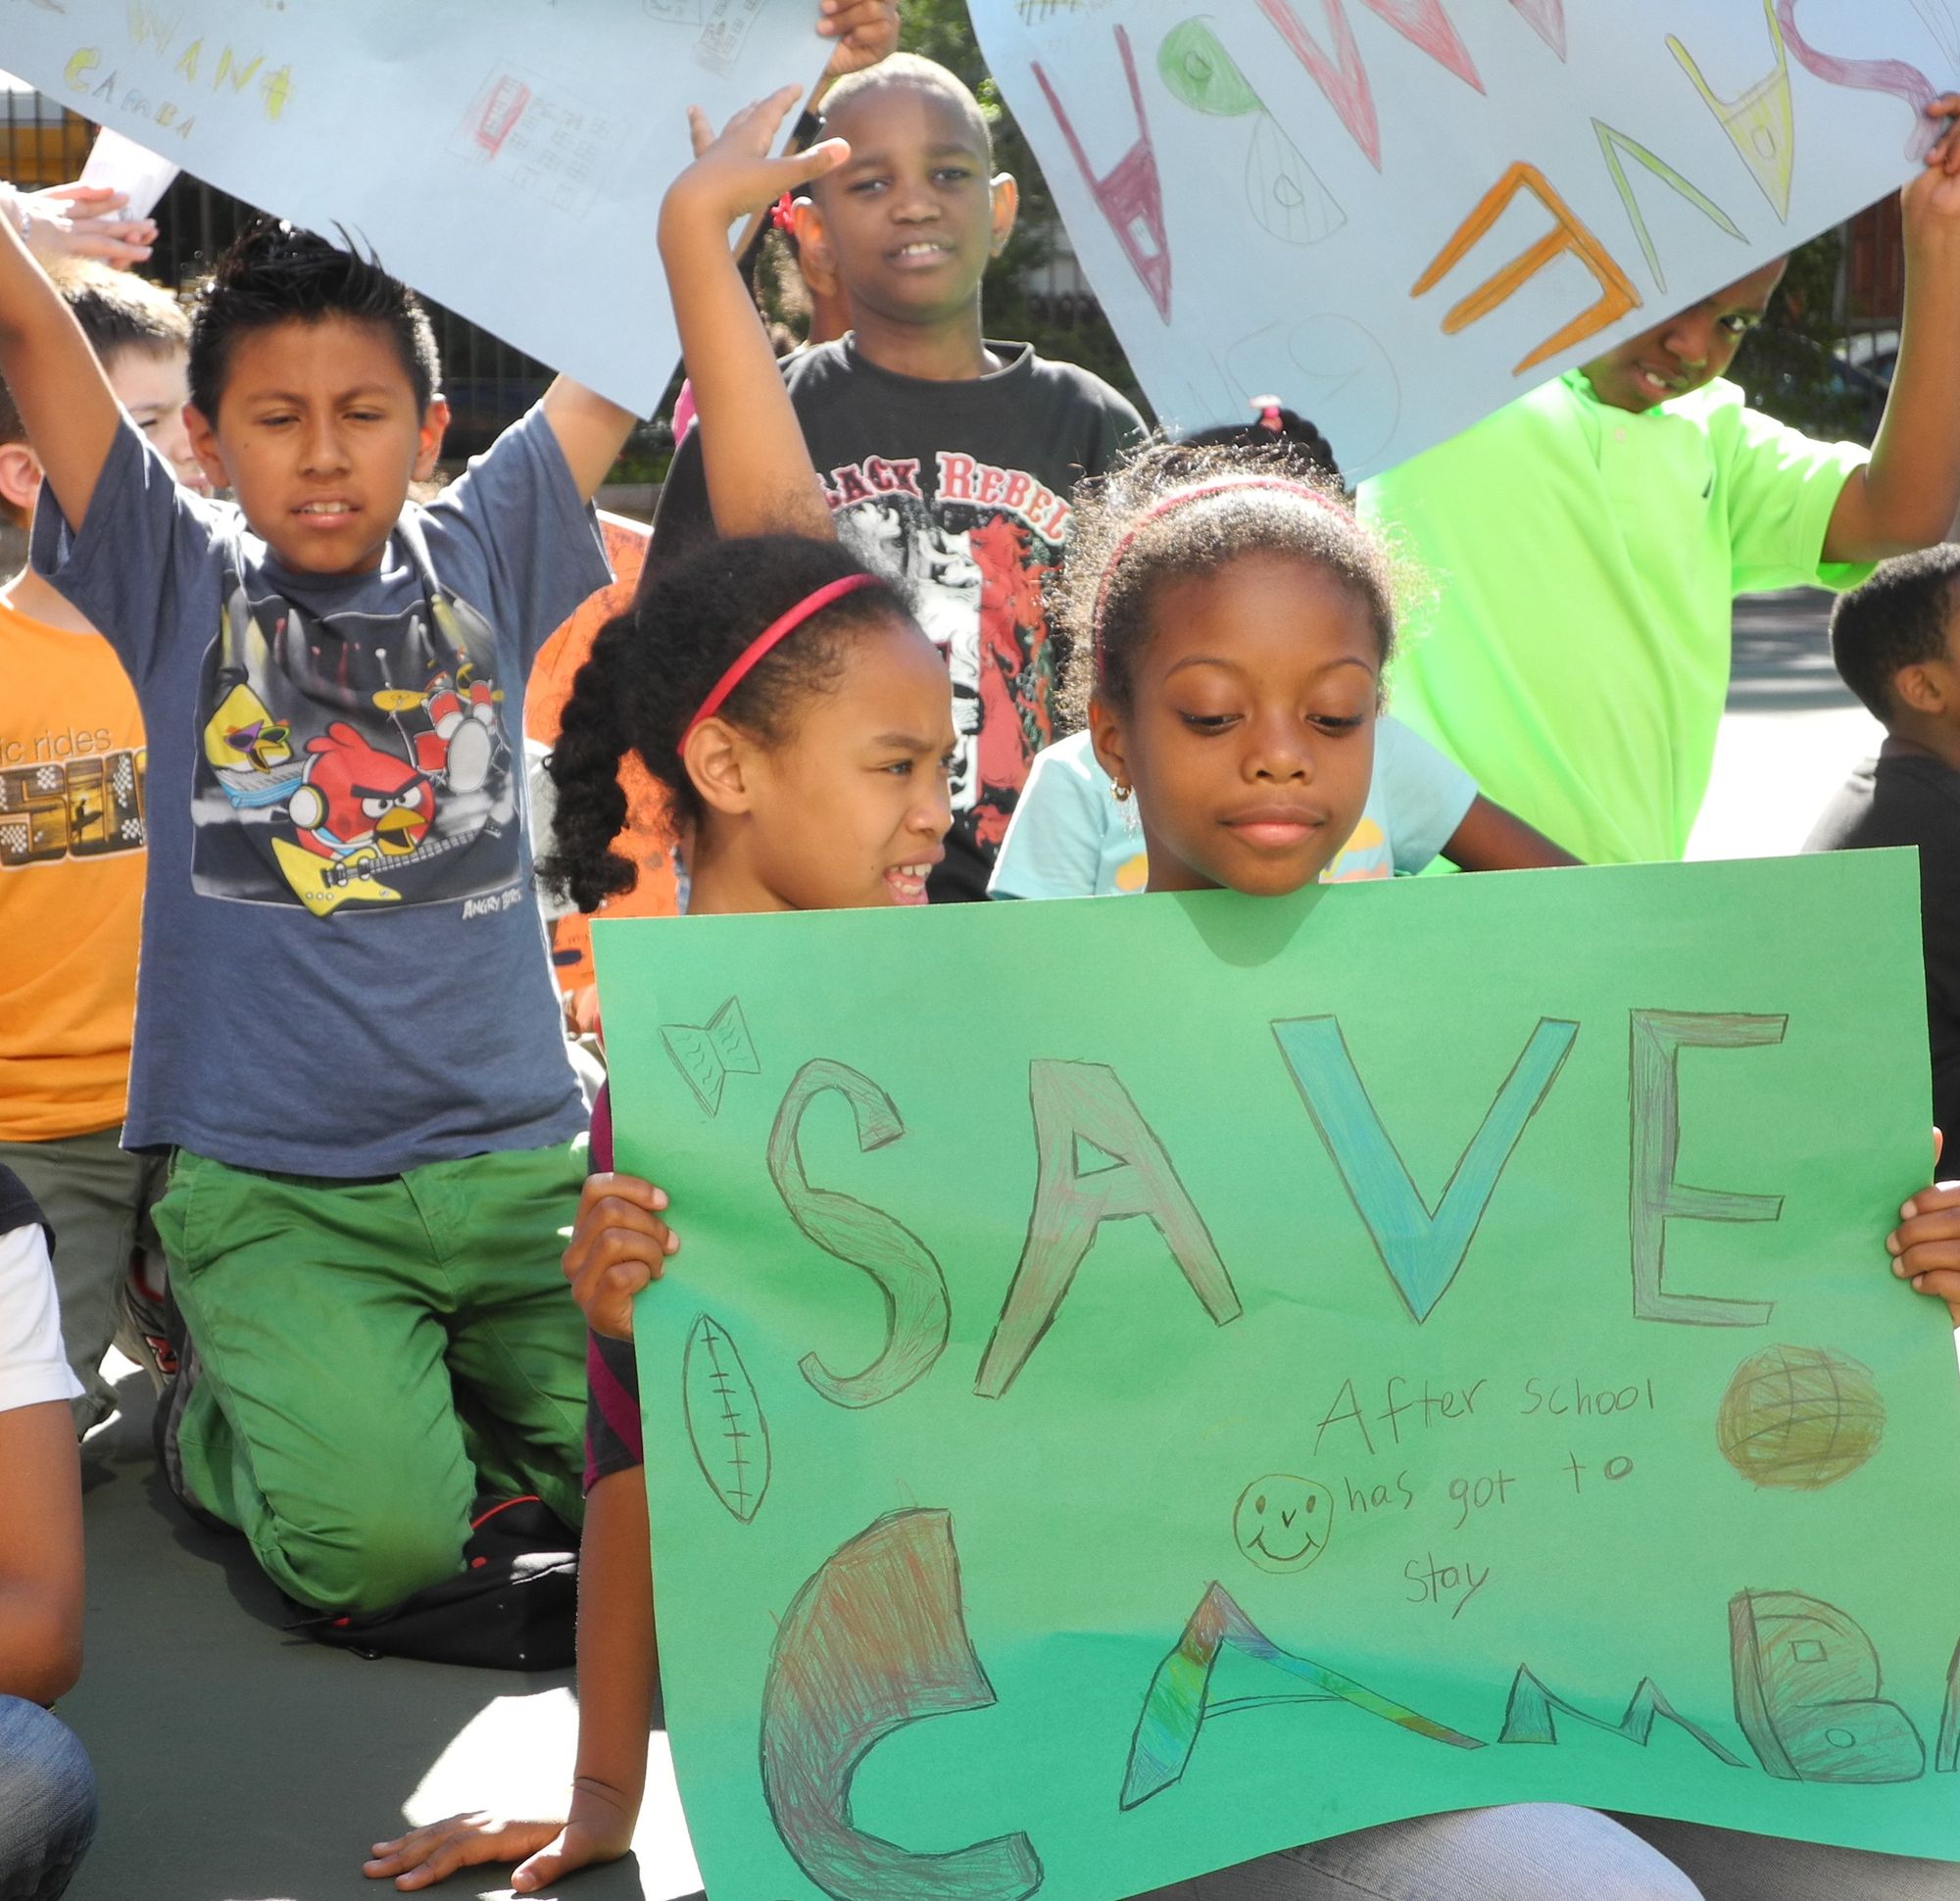 PS 139 & 249 Students Rally To Save After School Programs